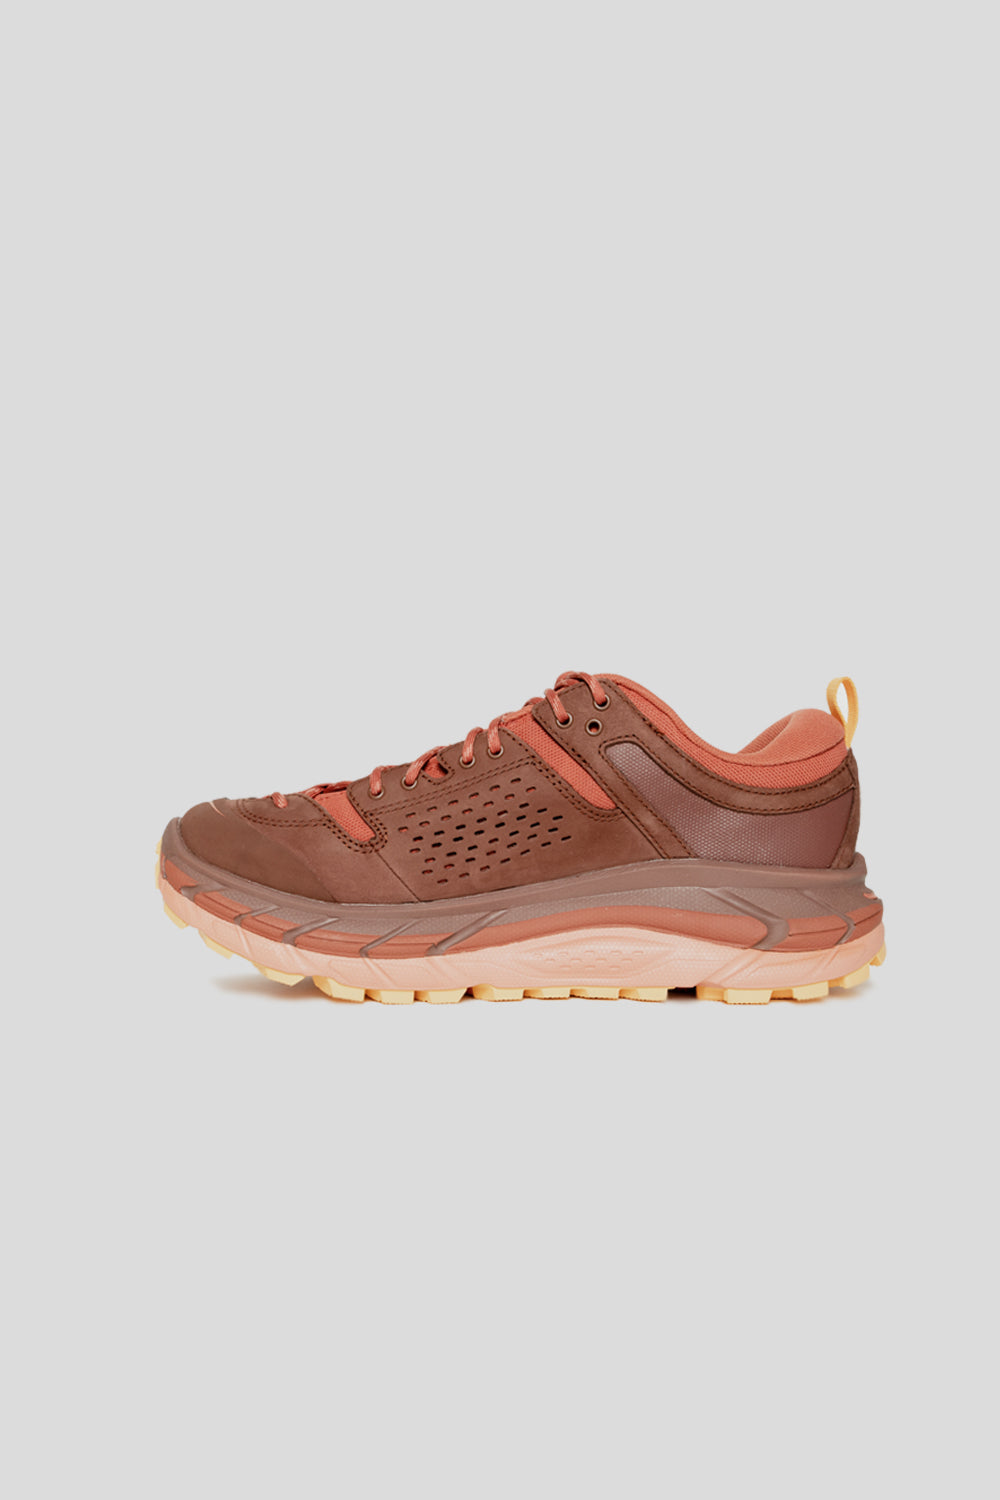 Hoka All Gender TOR ULTRA LO in Spice/Hot Sauce